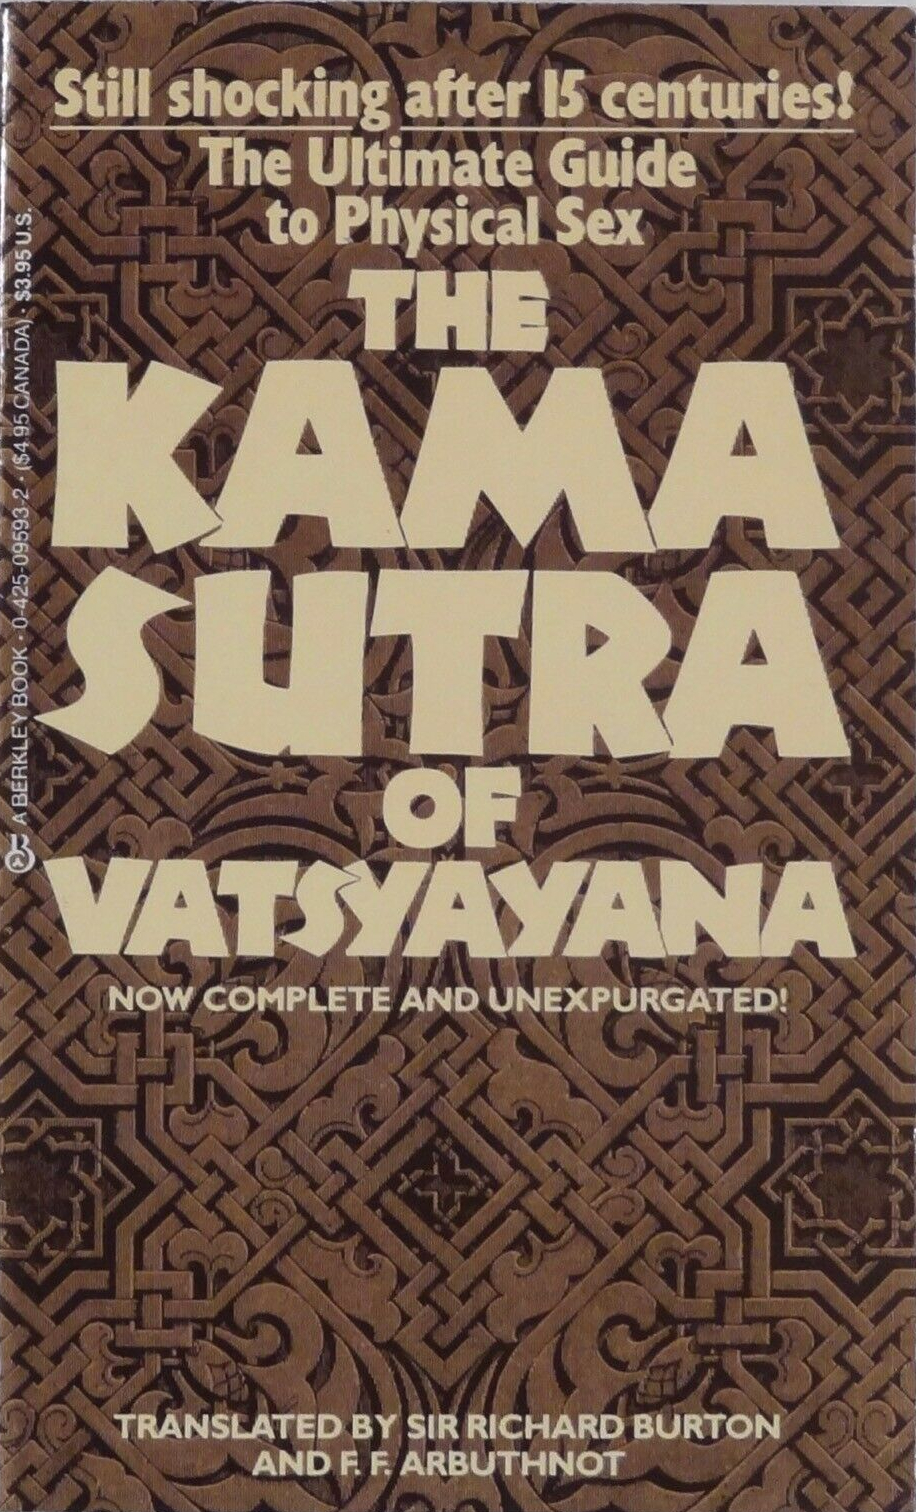 I think they well studied the book of Cama Sutra